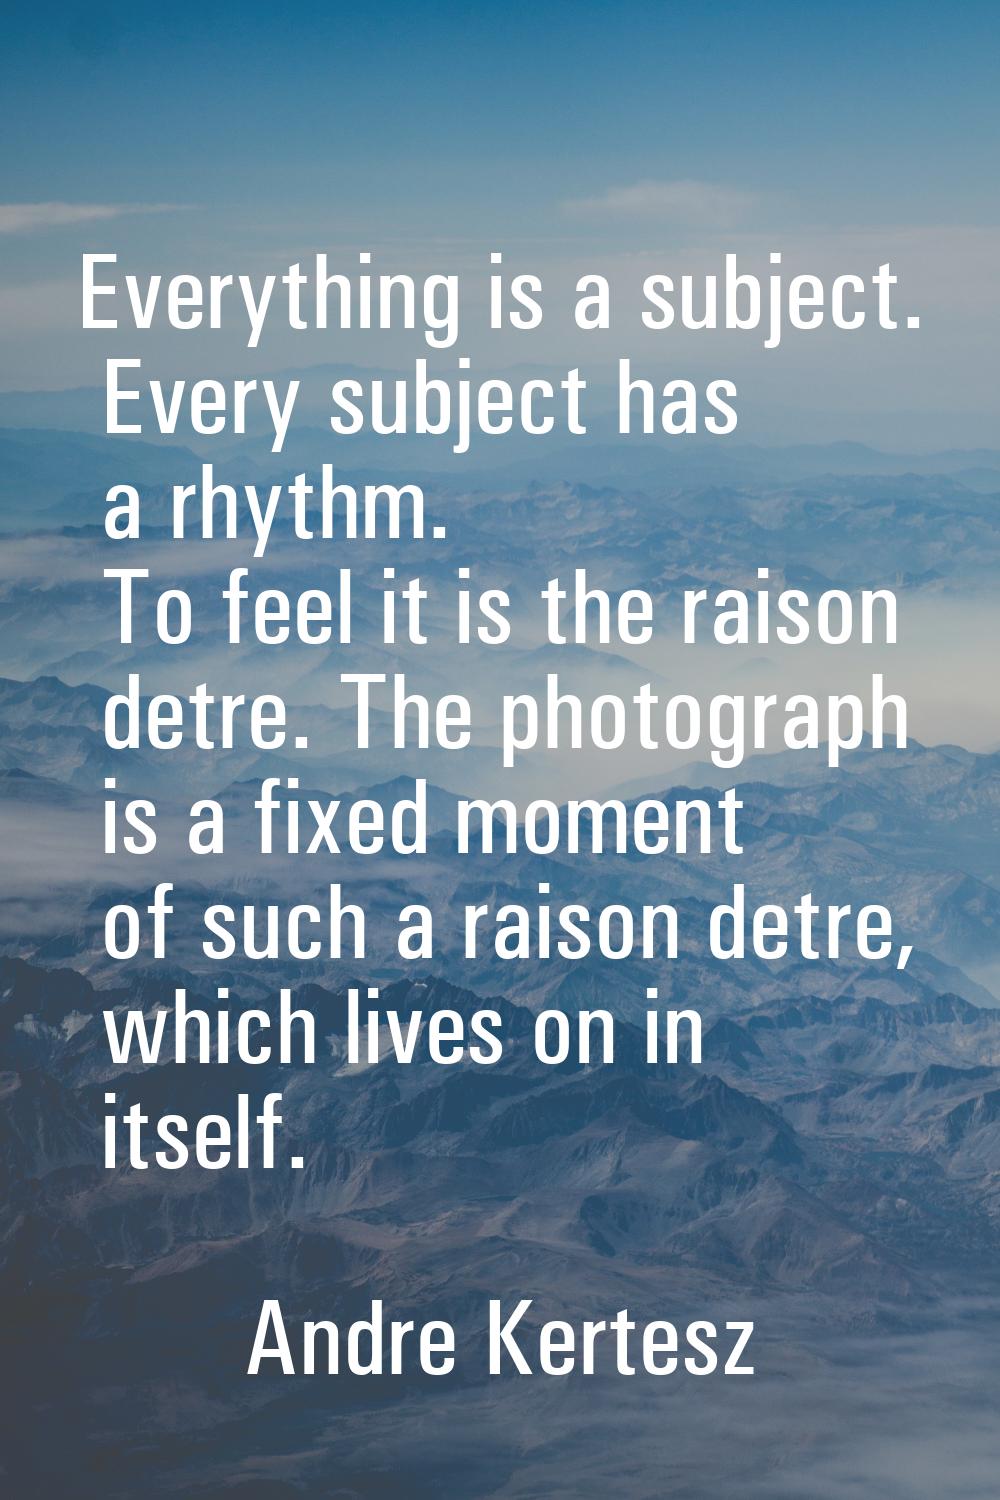 Everything is a subject. Every subject has a rhythm. To feel it is the raison detre. The photograph